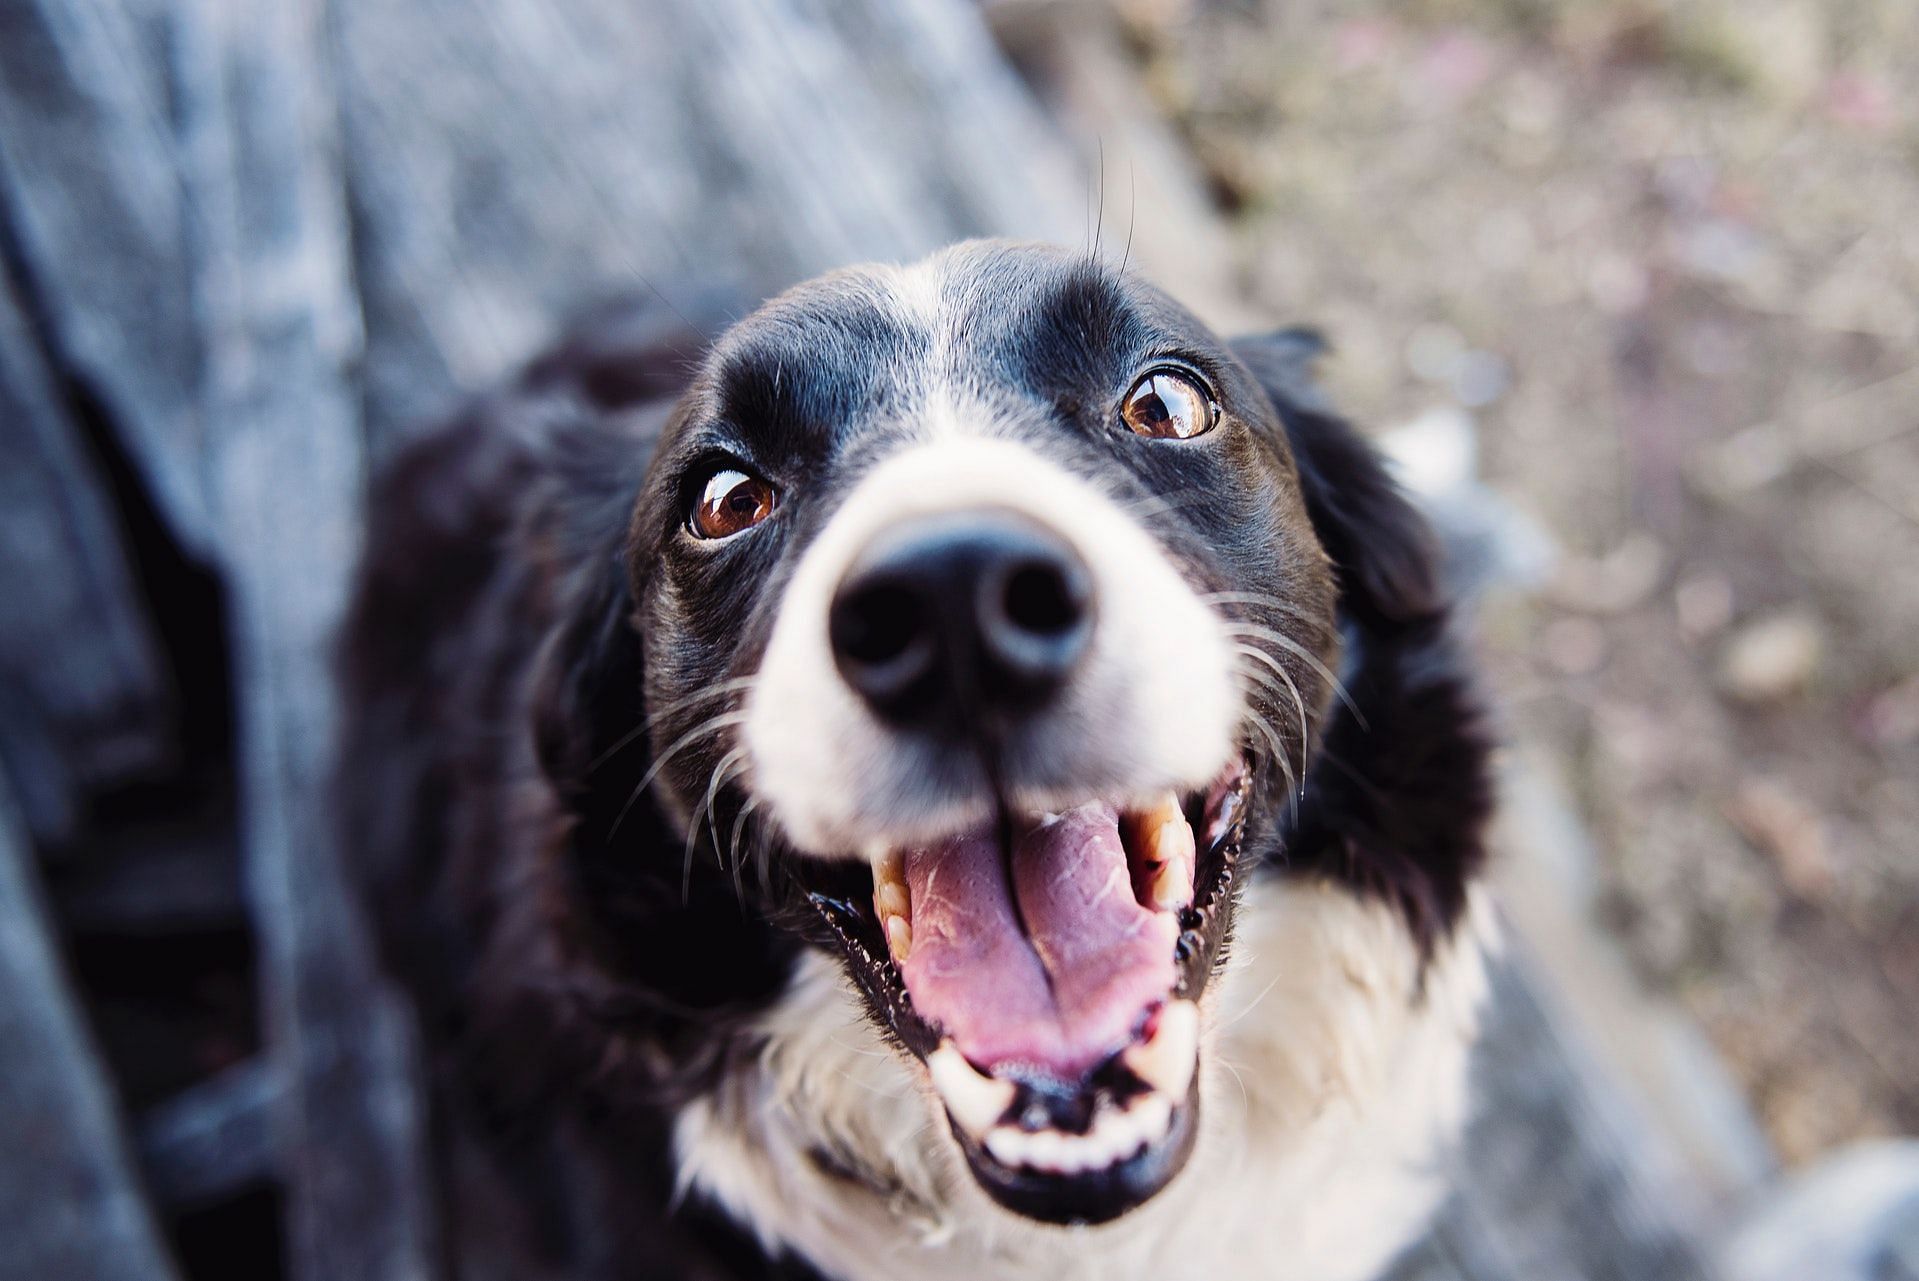 Vegan dog foods are clean and natural (Photo by Kat Smith via pexels)